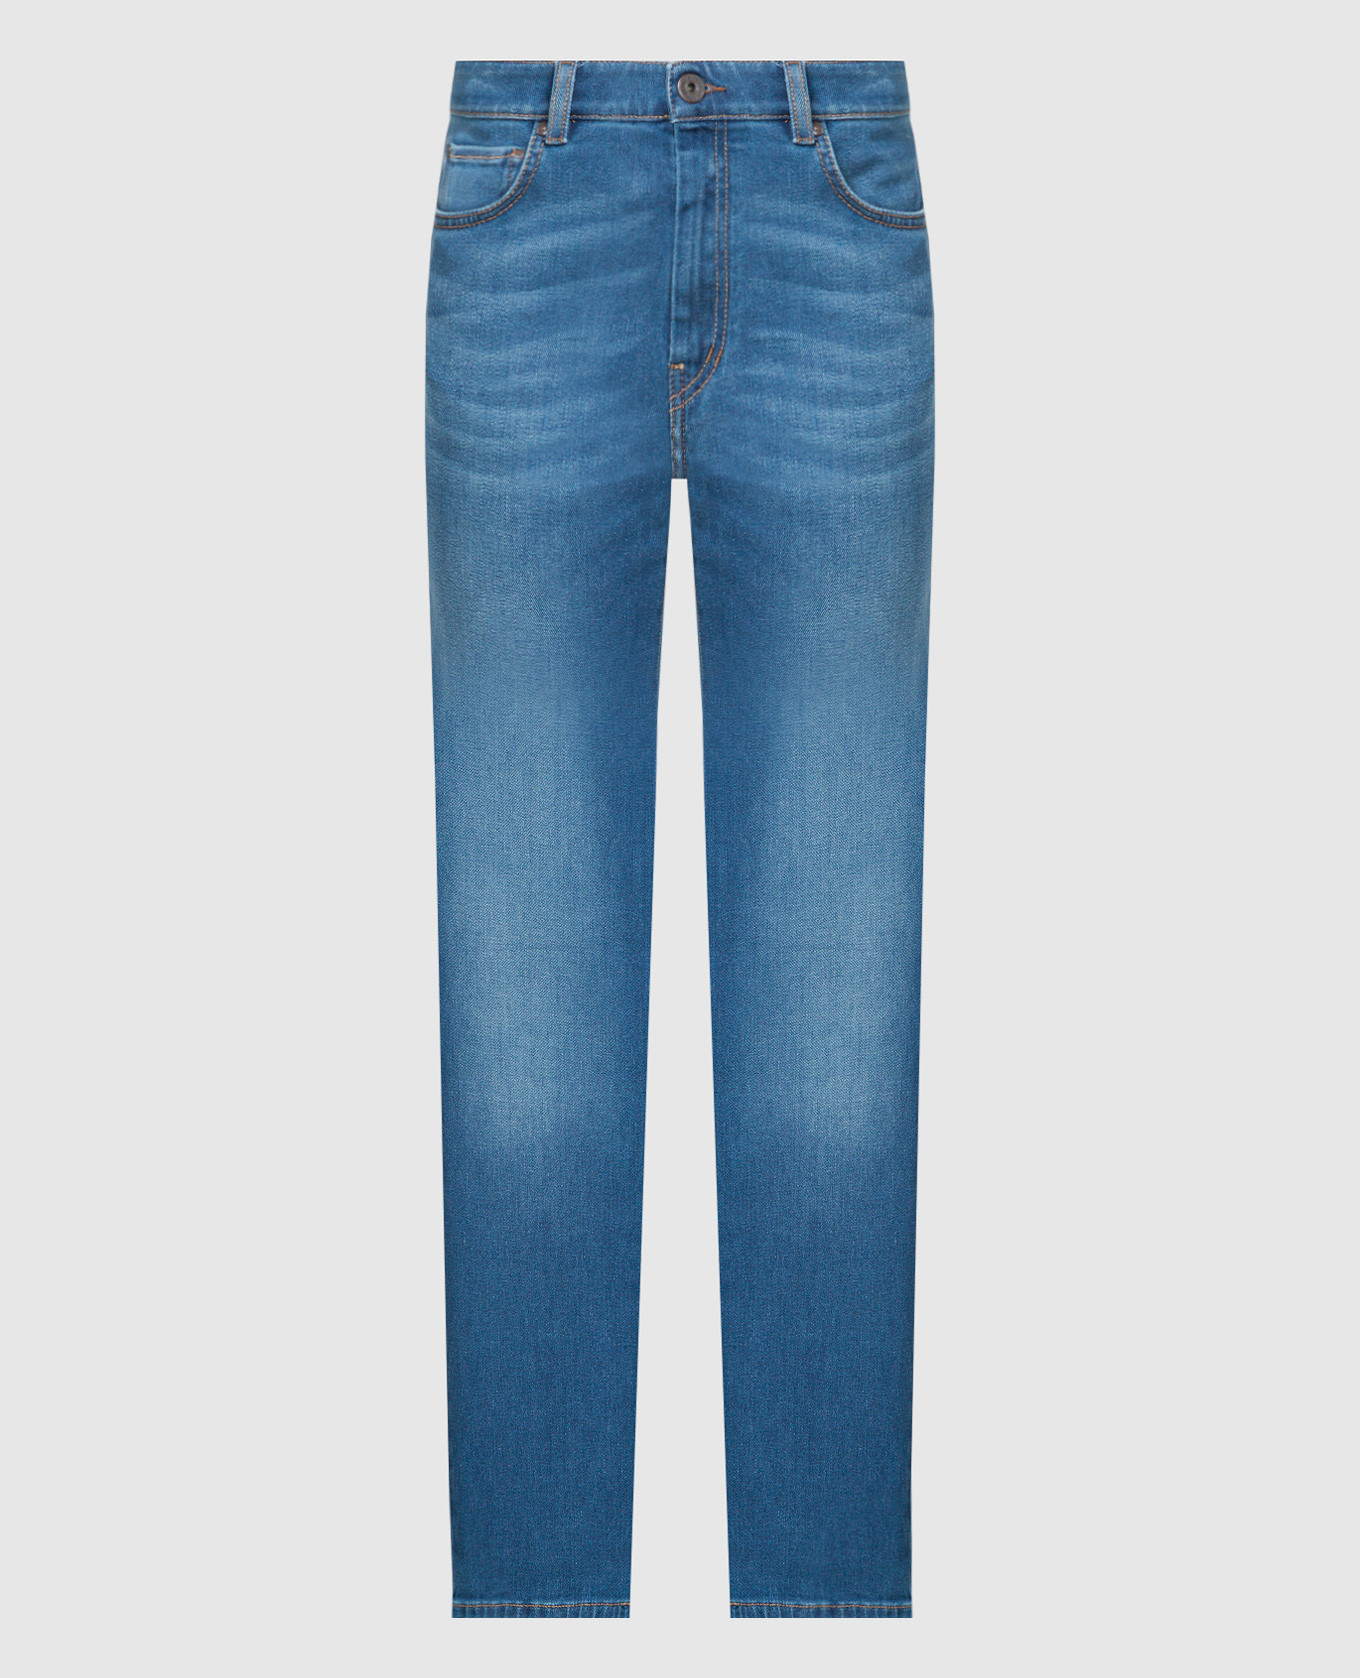 ORTISEI blue jeans with a distressed effect